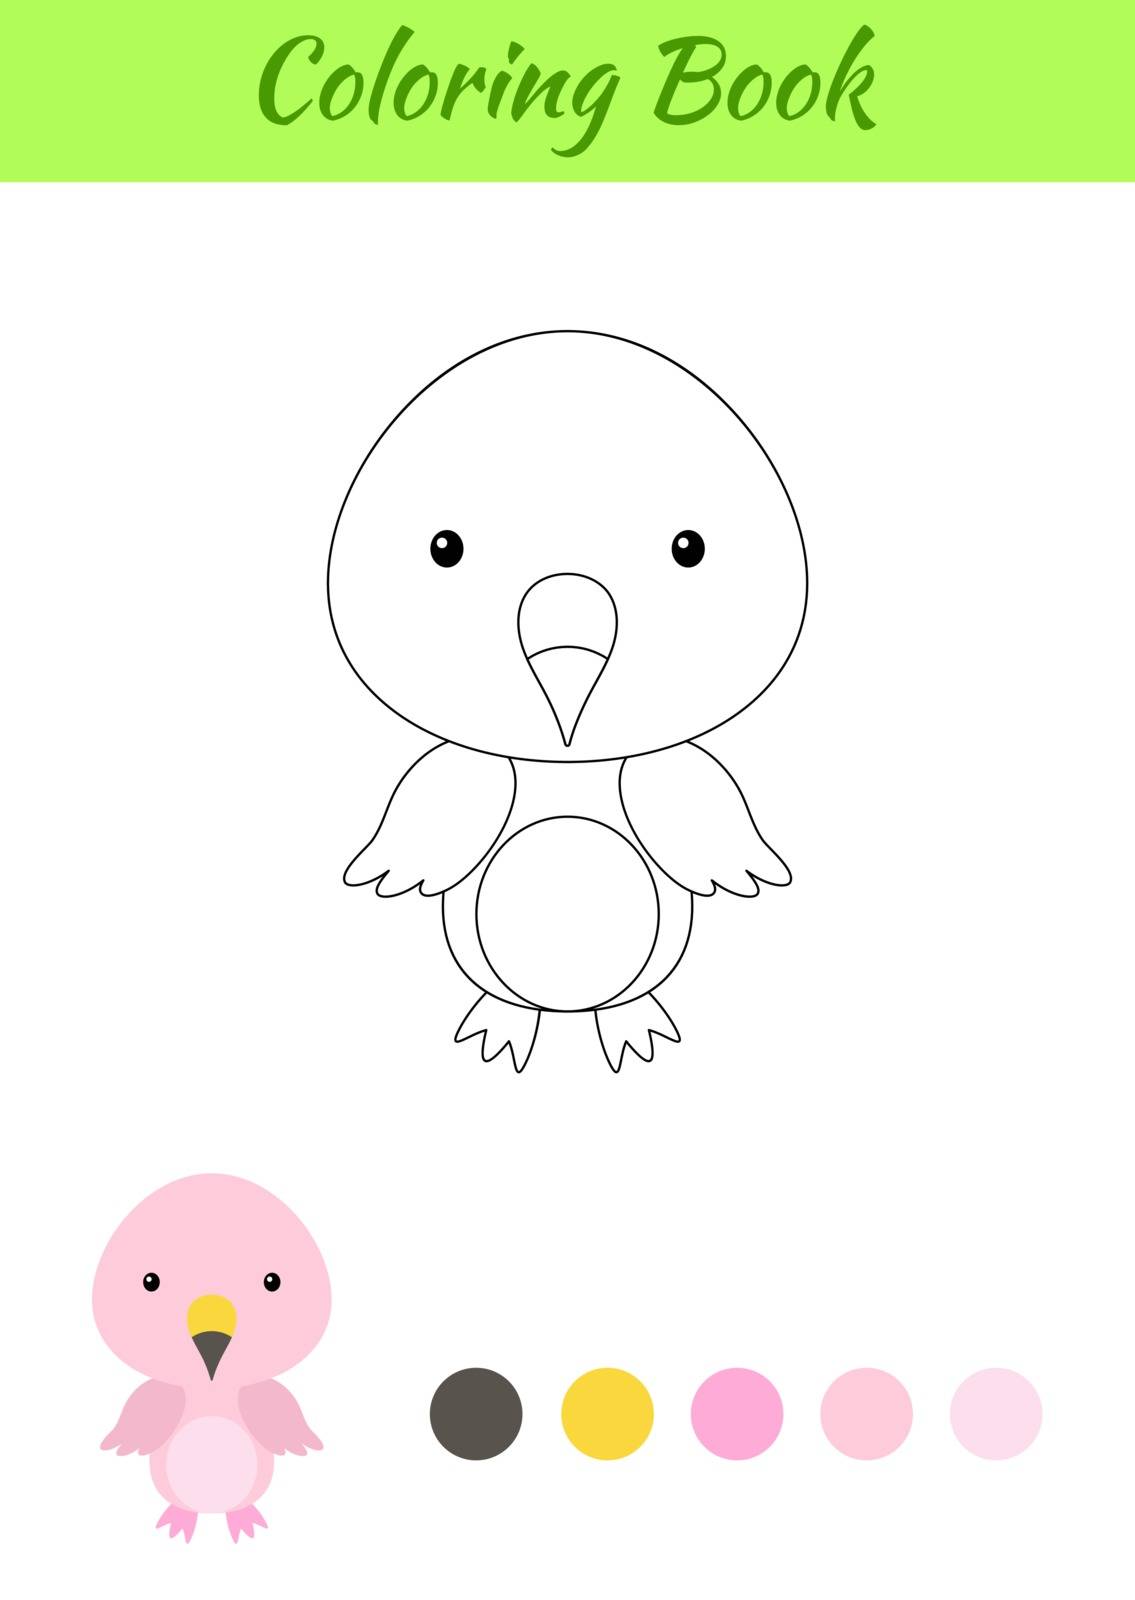 Coloring page happy little baby flamingo. Printable coloring book for kids. Educational activity for kindergarten and preschool with cute animal. Flat cartoon colorful vector illustration.